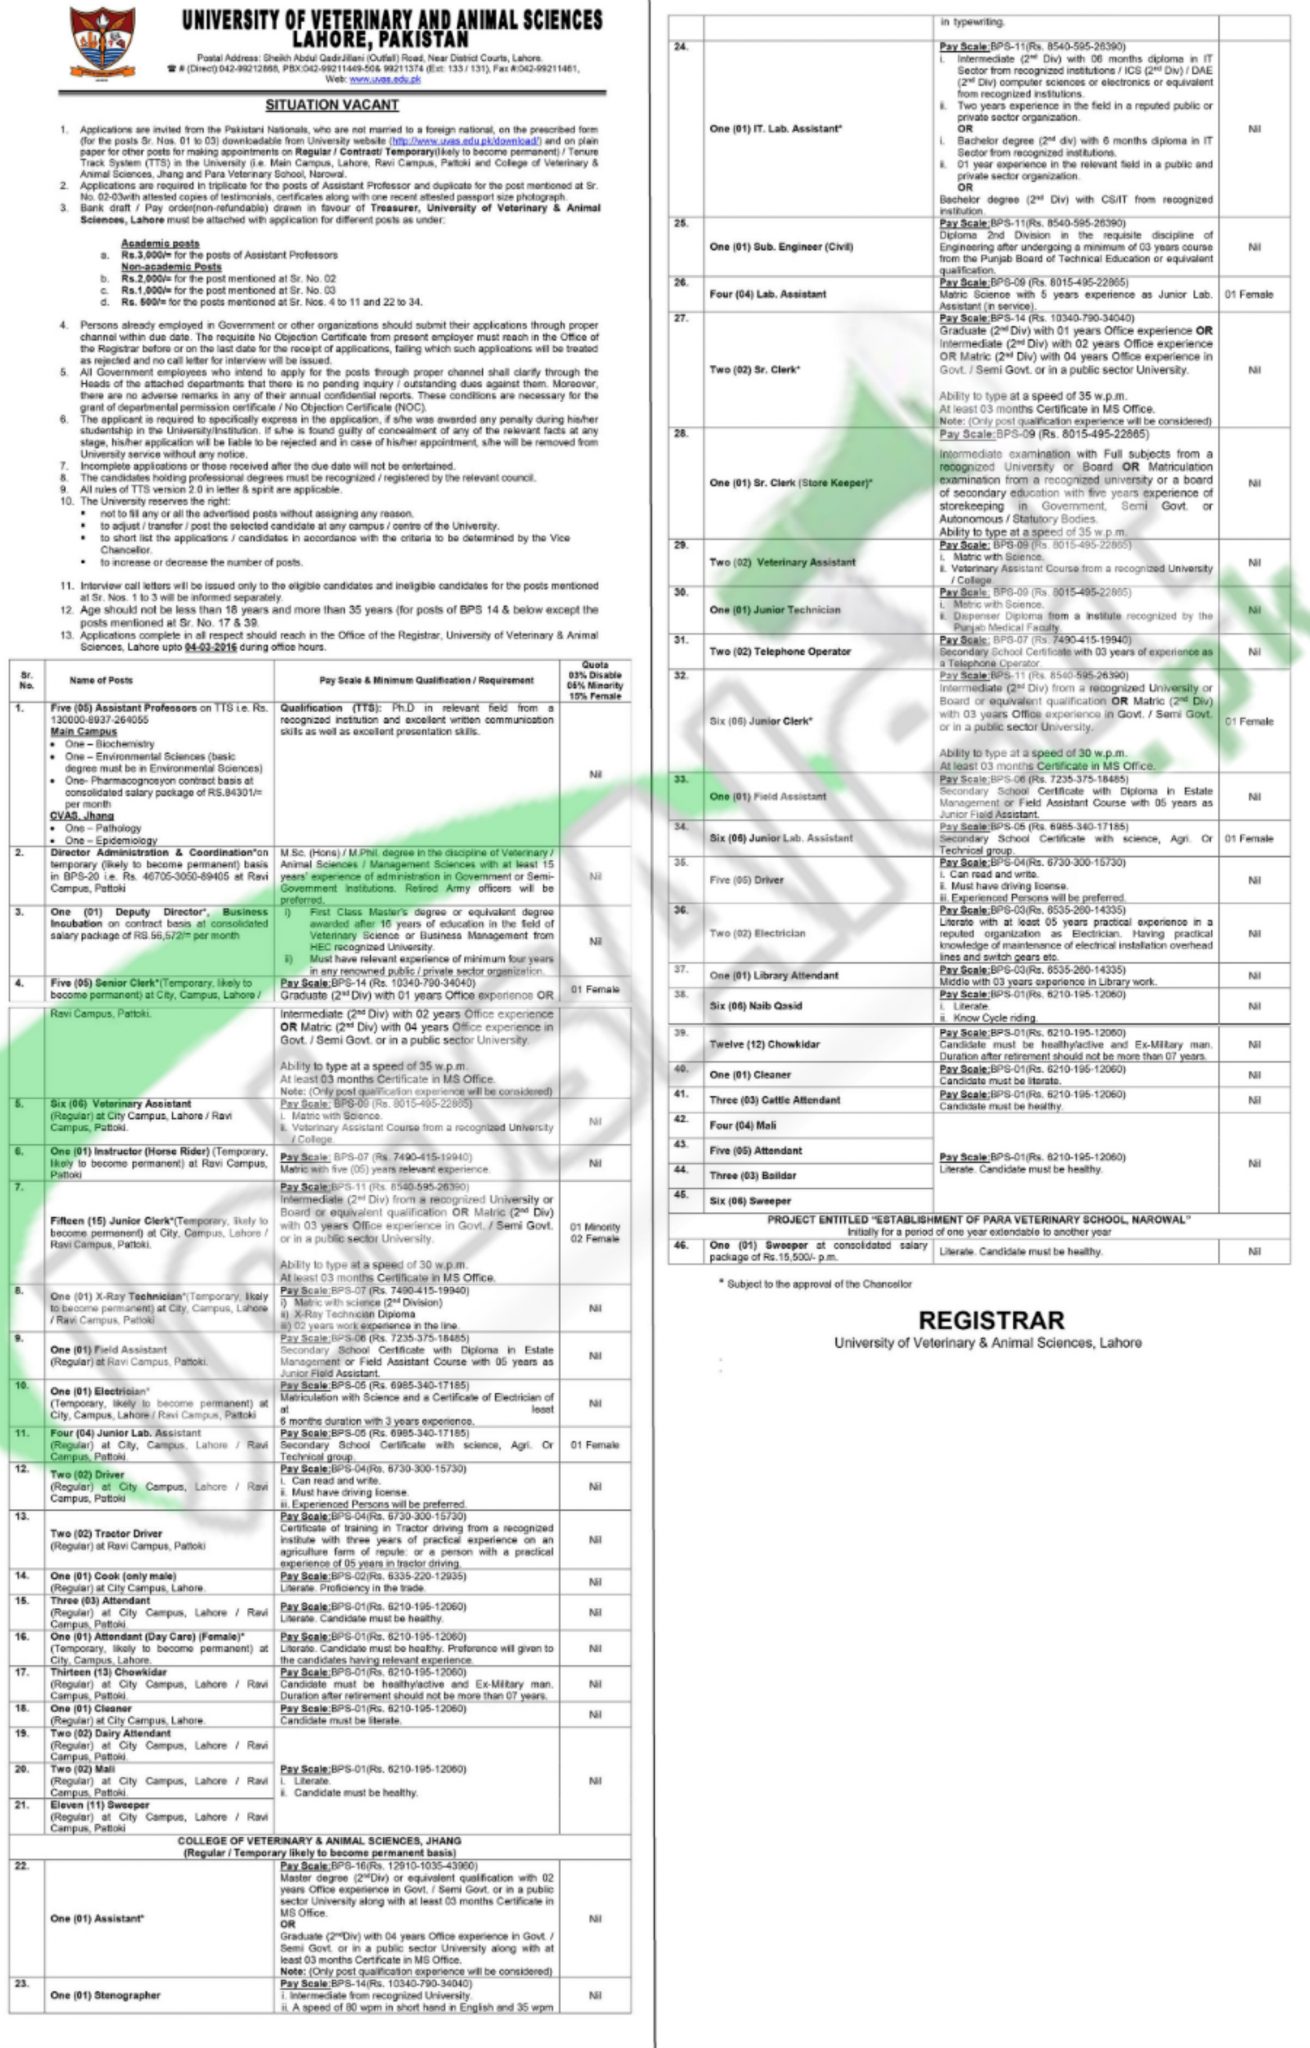 Situations Vacant in UVAS Lahore February/March 2016 Application Form Last Date Career Opportunities